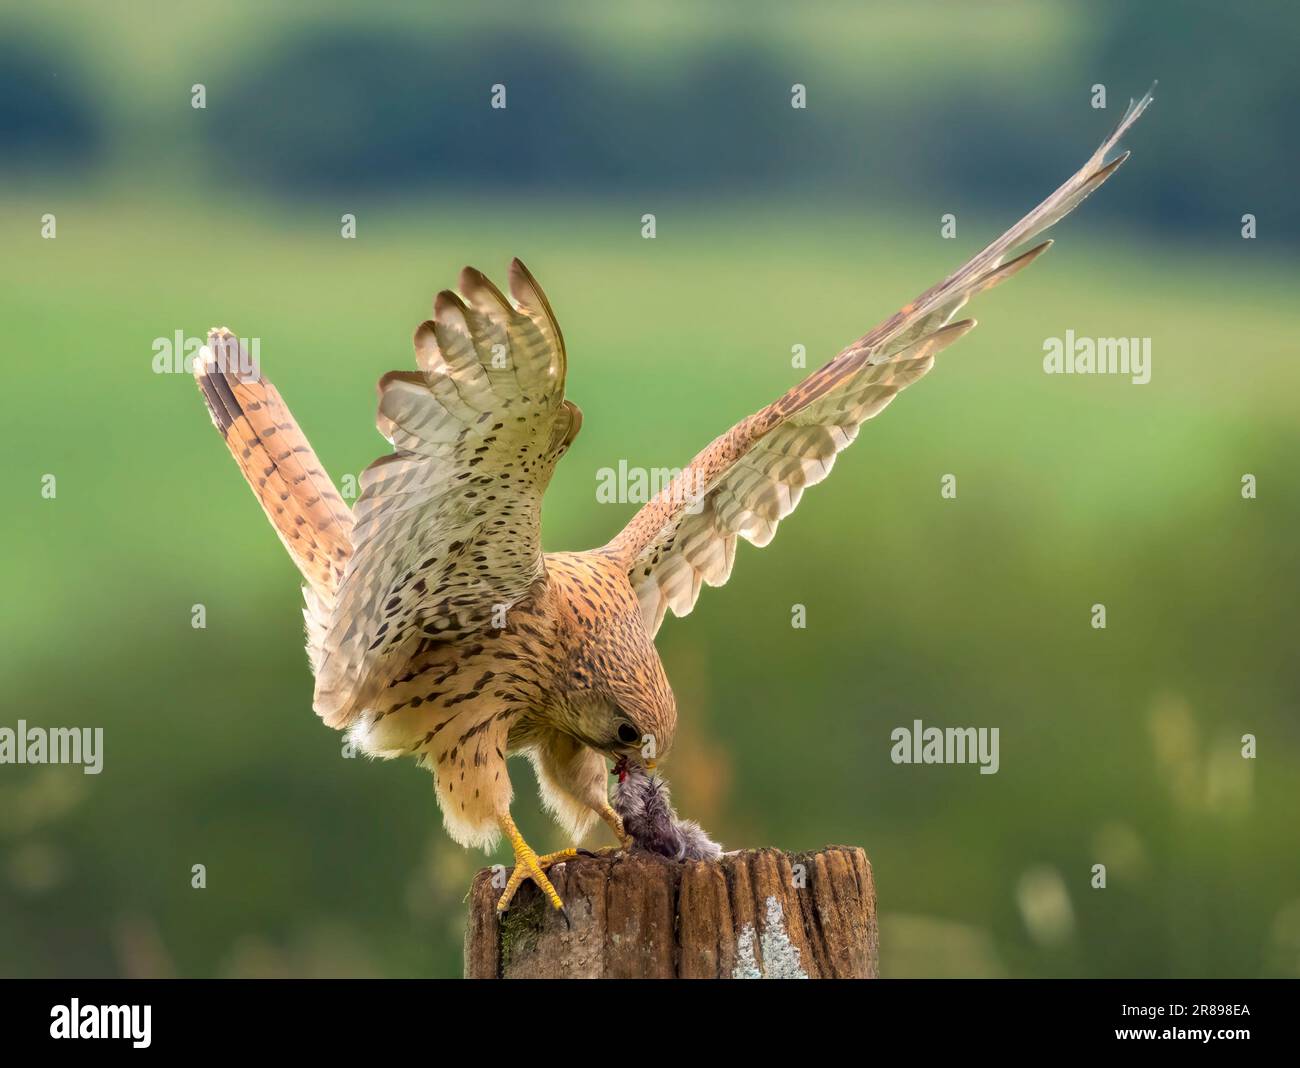 A beautiful female Kestrel, (Falco tinnunculus), use it's large wingspan to balance on an old wooden gate post with a mouse it has just caught Stock Photo